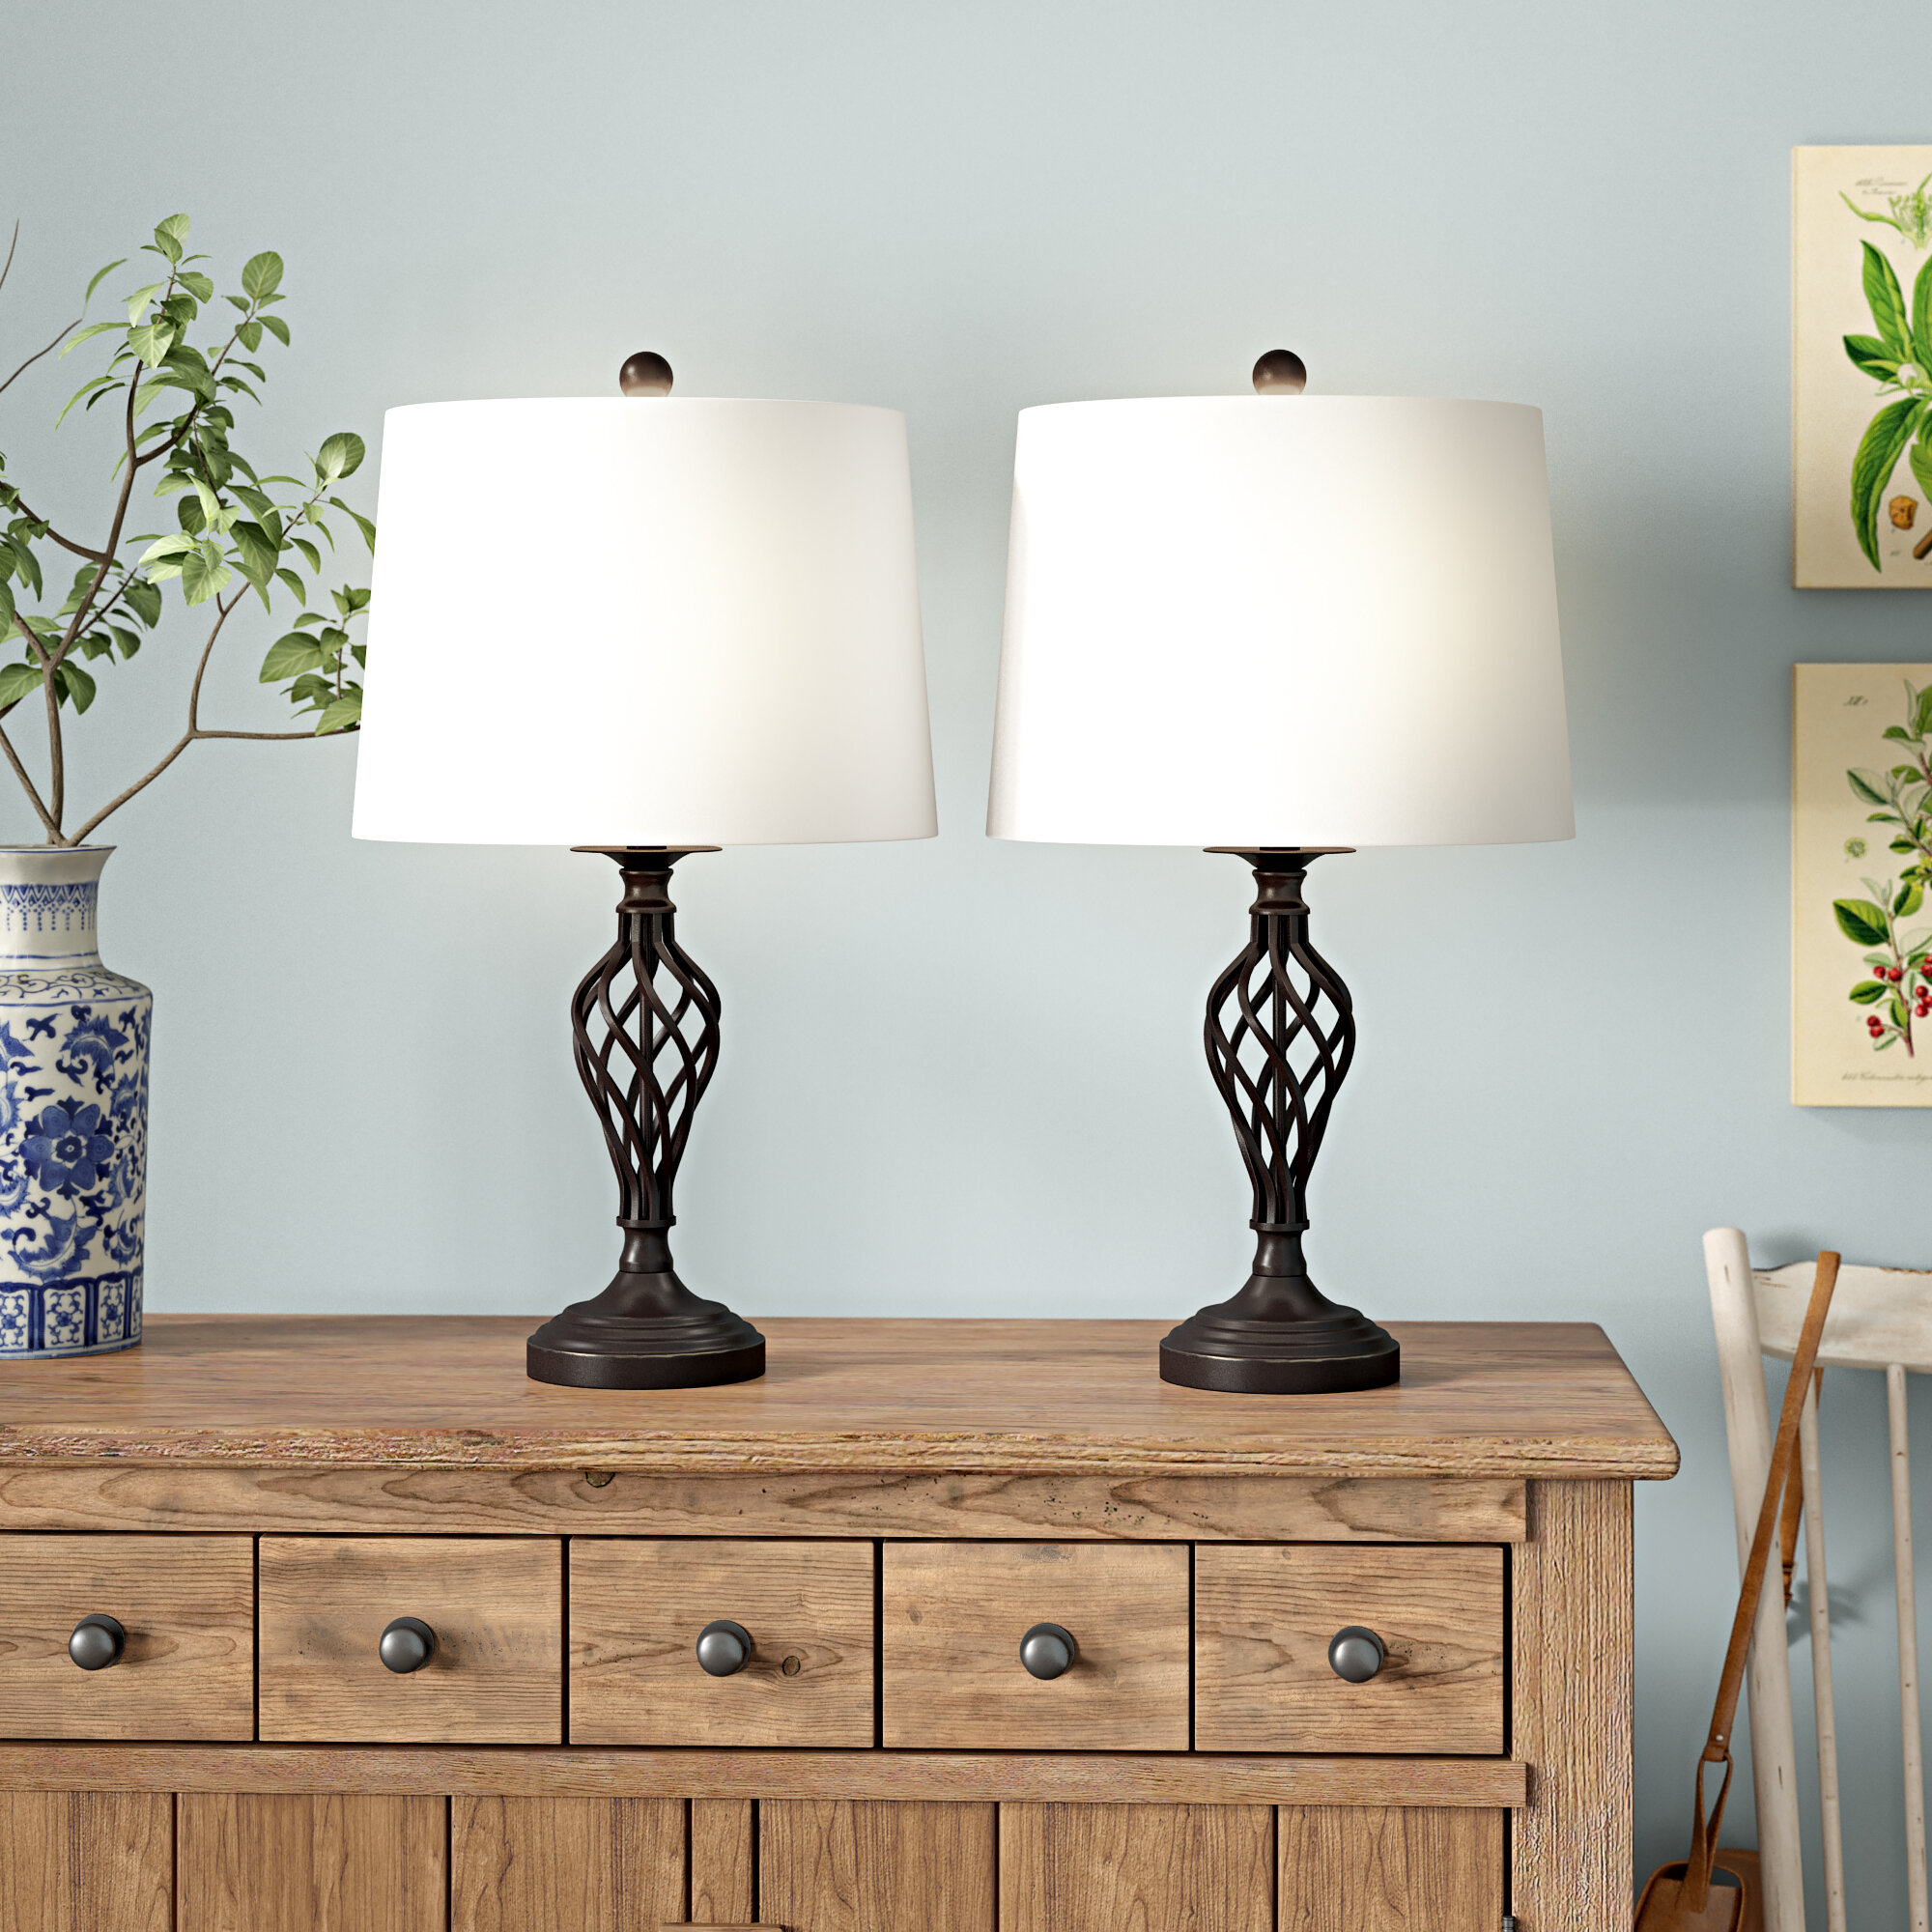 traditional bedroom table lamps